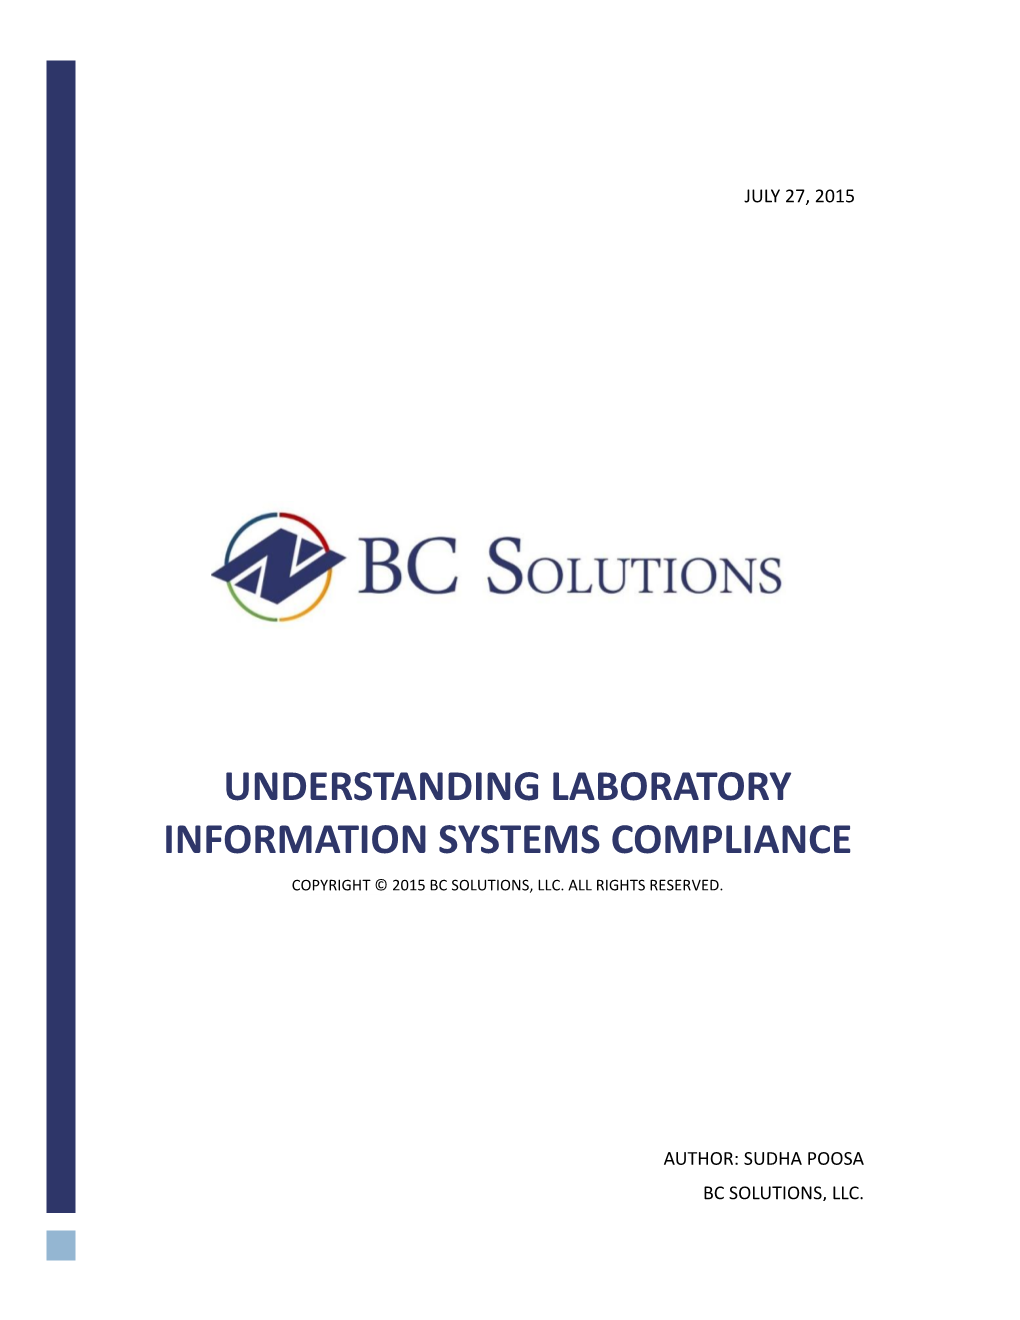 Understanding Laboratory Information Systems Compliance Copyright © 2015 Bc Solutions, Llc